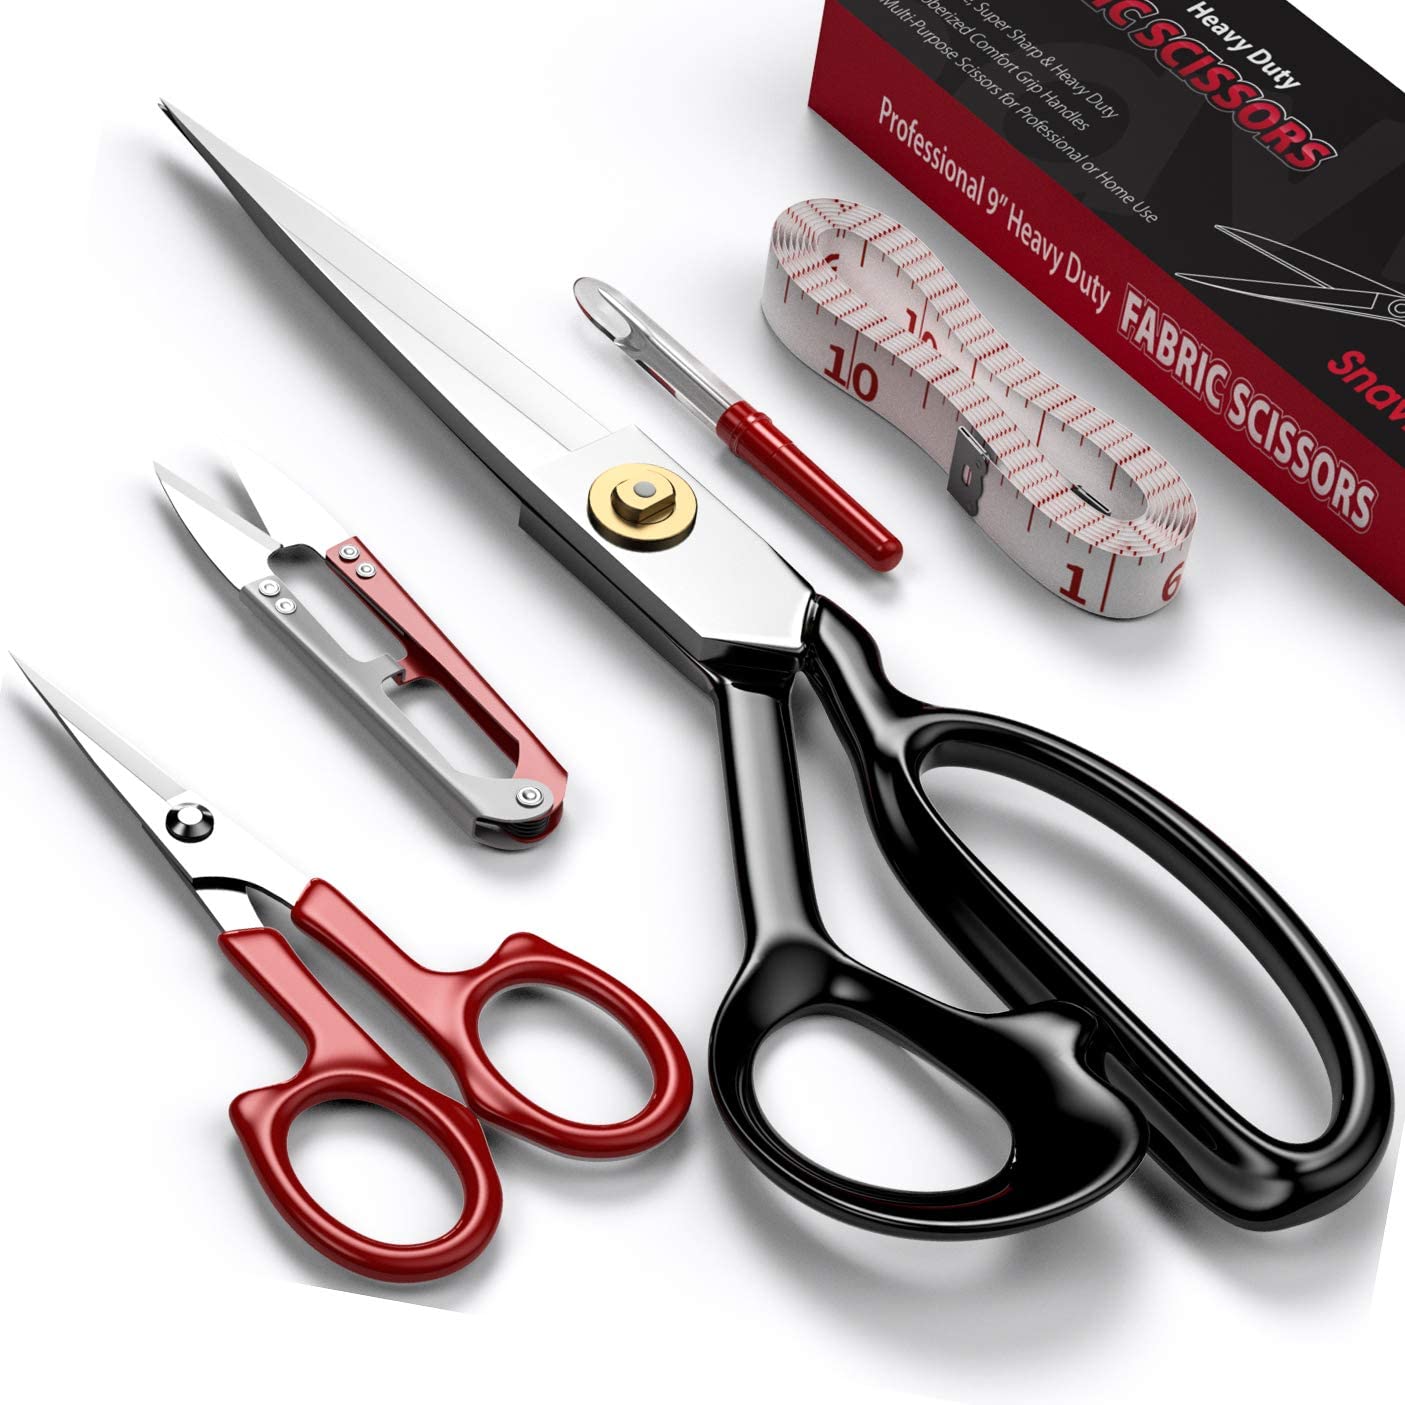 UPHOLSTERY CYNAMED SEWING HEAVY DUTY DRESSMAKING 6 FABRIC CUTTING TAILOR SHEAR 1 GERMAN PREMIUM TAILOR SCISSORS 